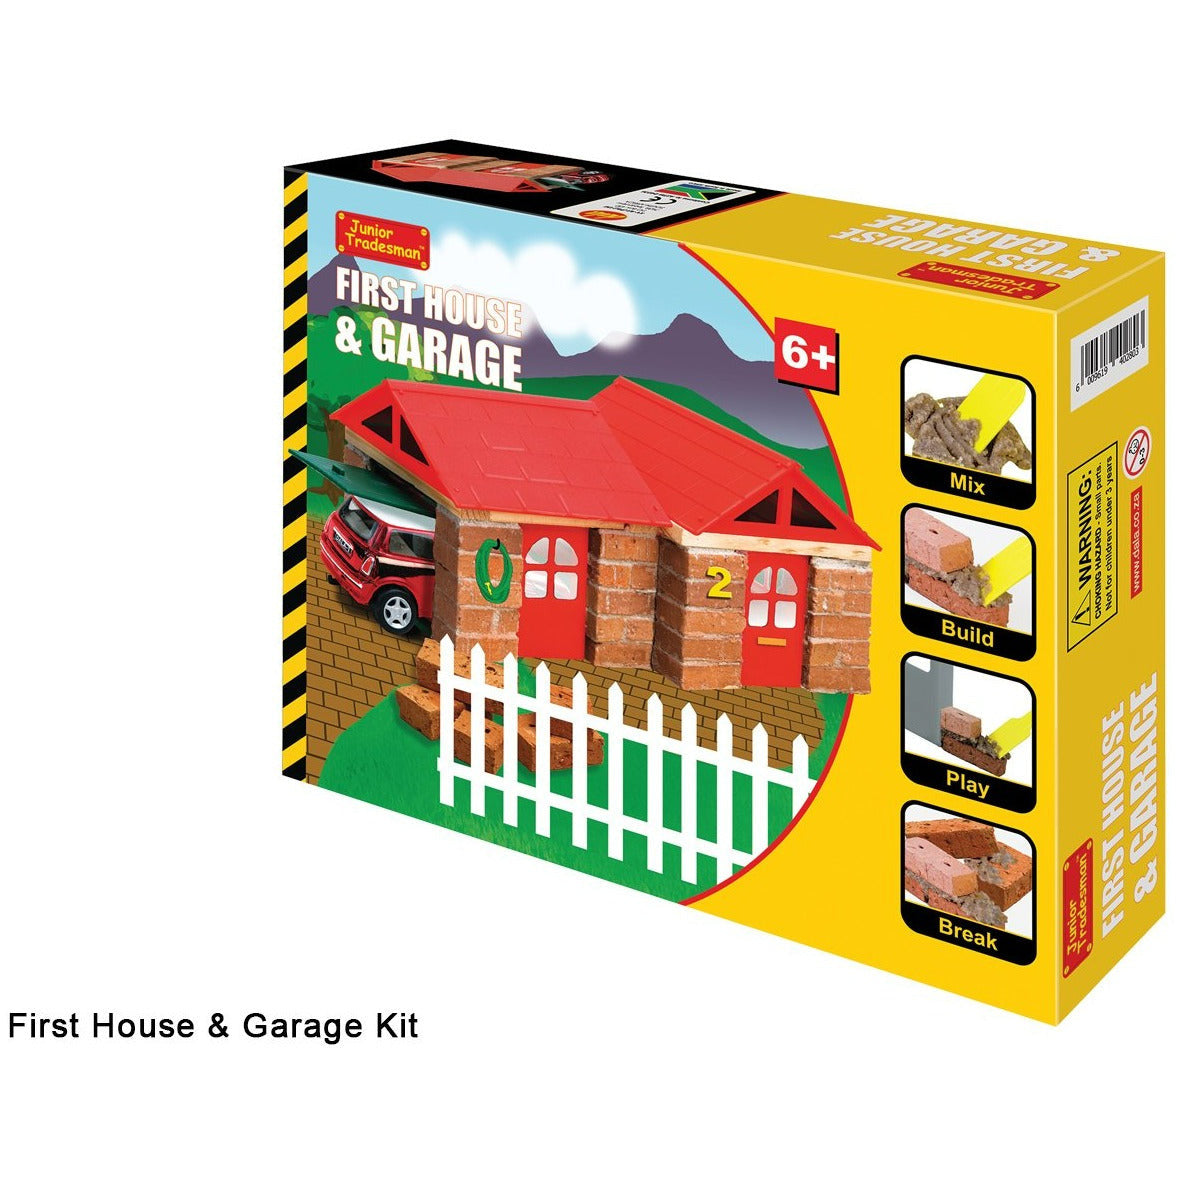 First House & Garage Construction Kit